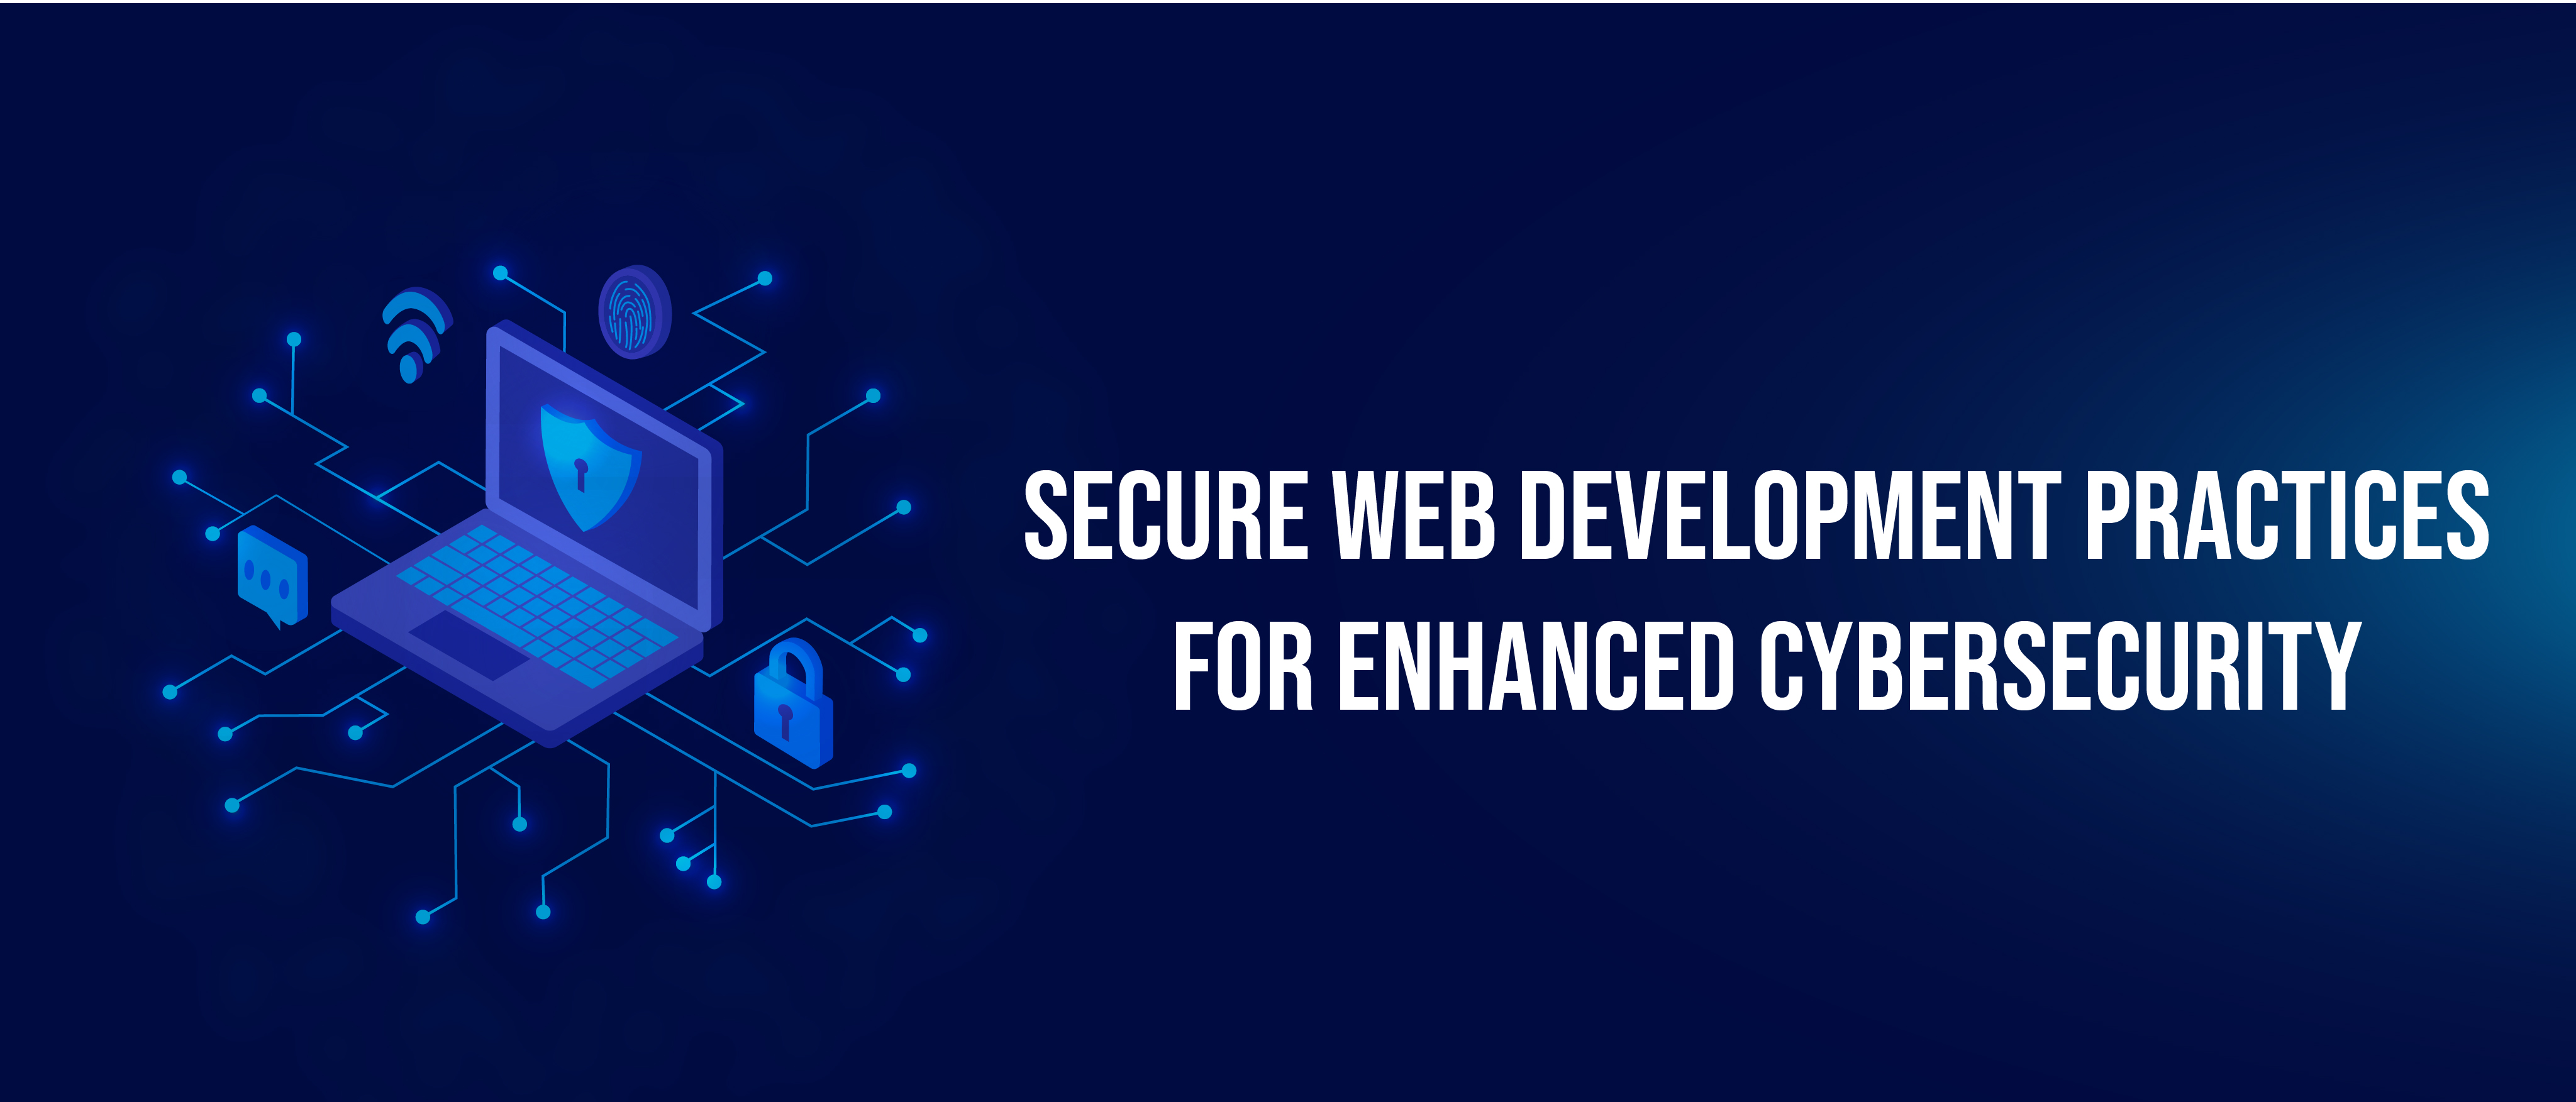 Secure Web Development Practices for Enhanced Cybersecurity